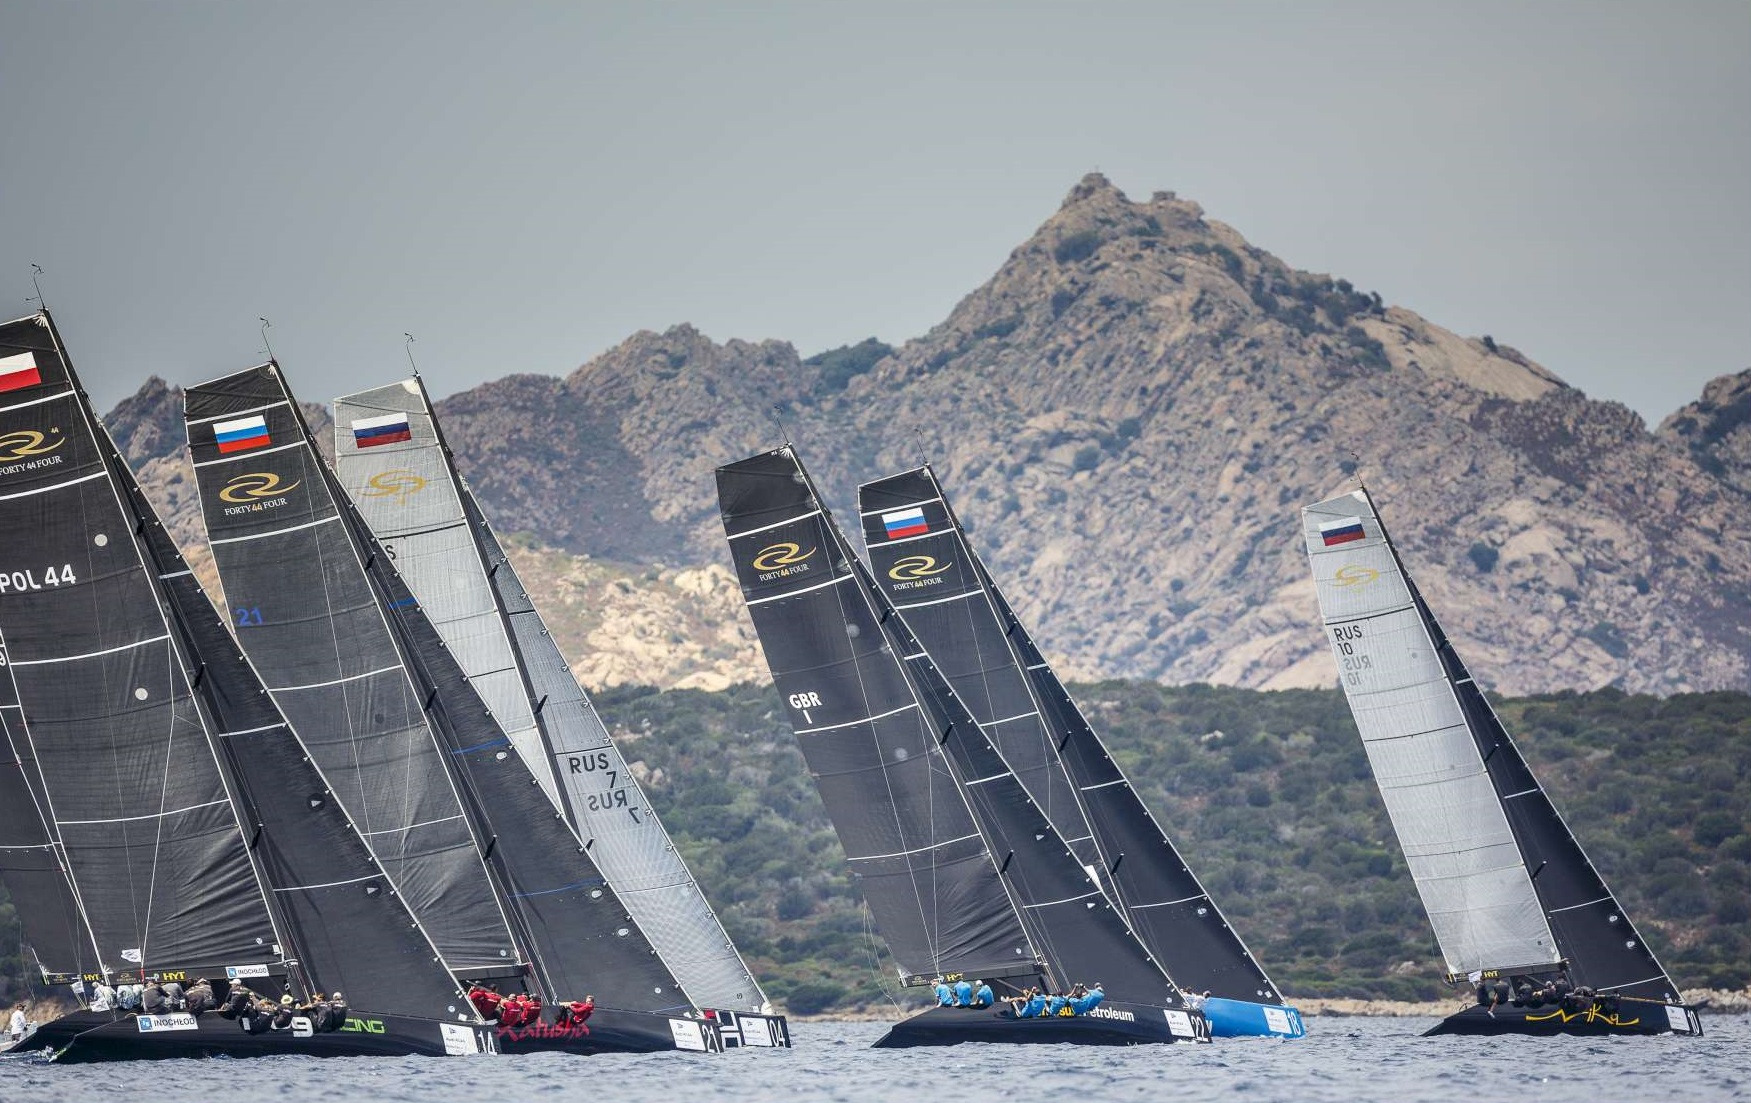 From Bermuda to Porto Cervo: the second event in the RC44 Championship is about to get underway - NEWS - Yacht Club Costa Smeralda